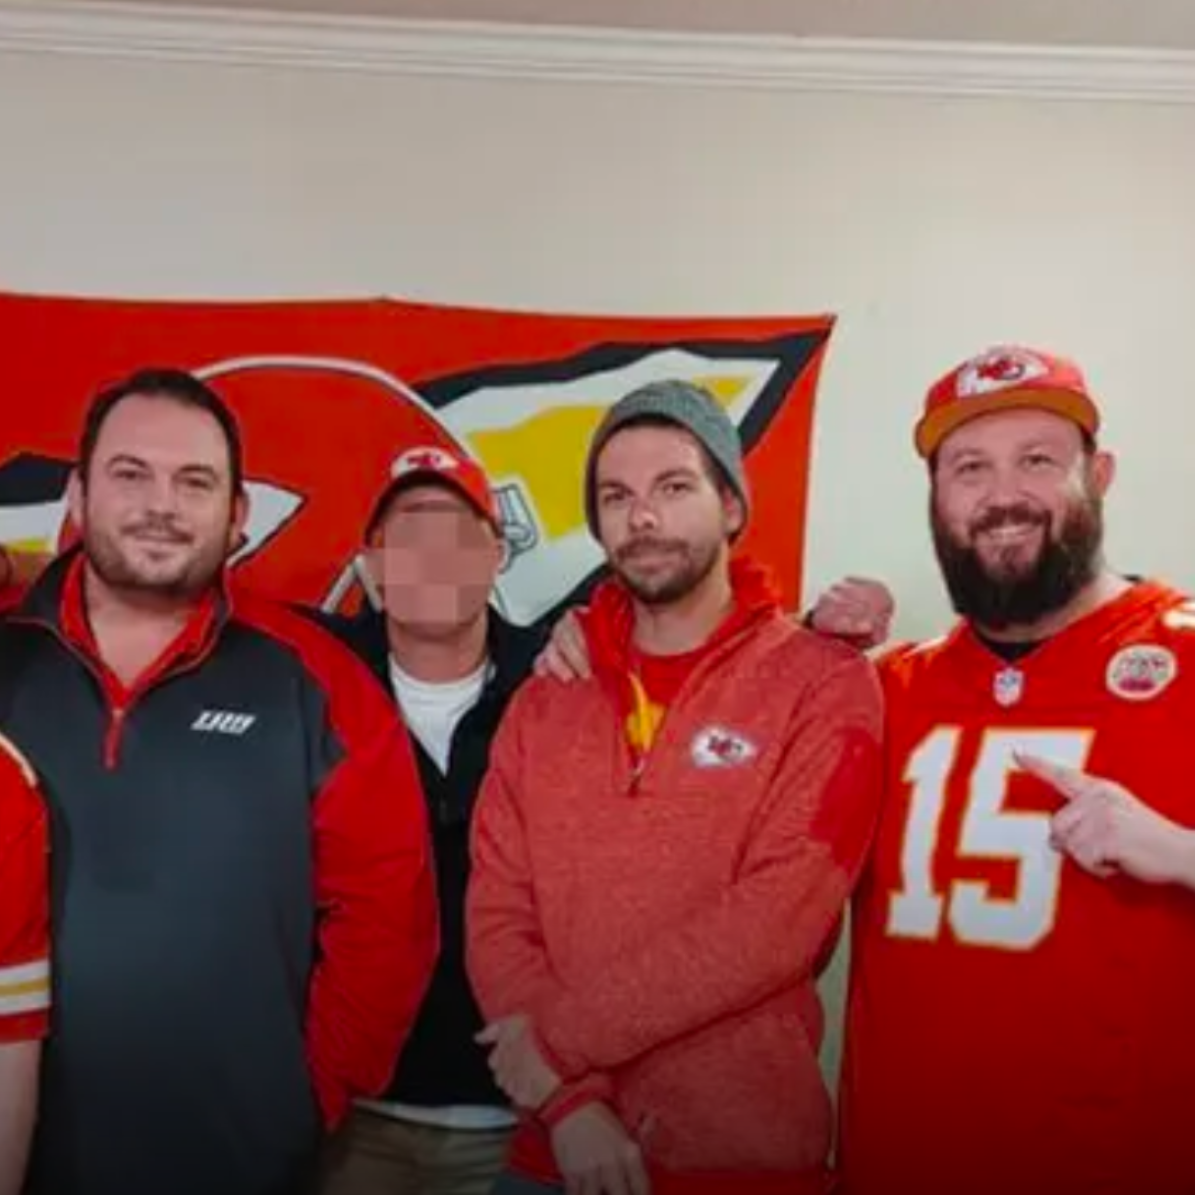 Kansas City Chiefs Fan who Hosted Watch Party where Three Friends Froze to Death Checks into Rehab